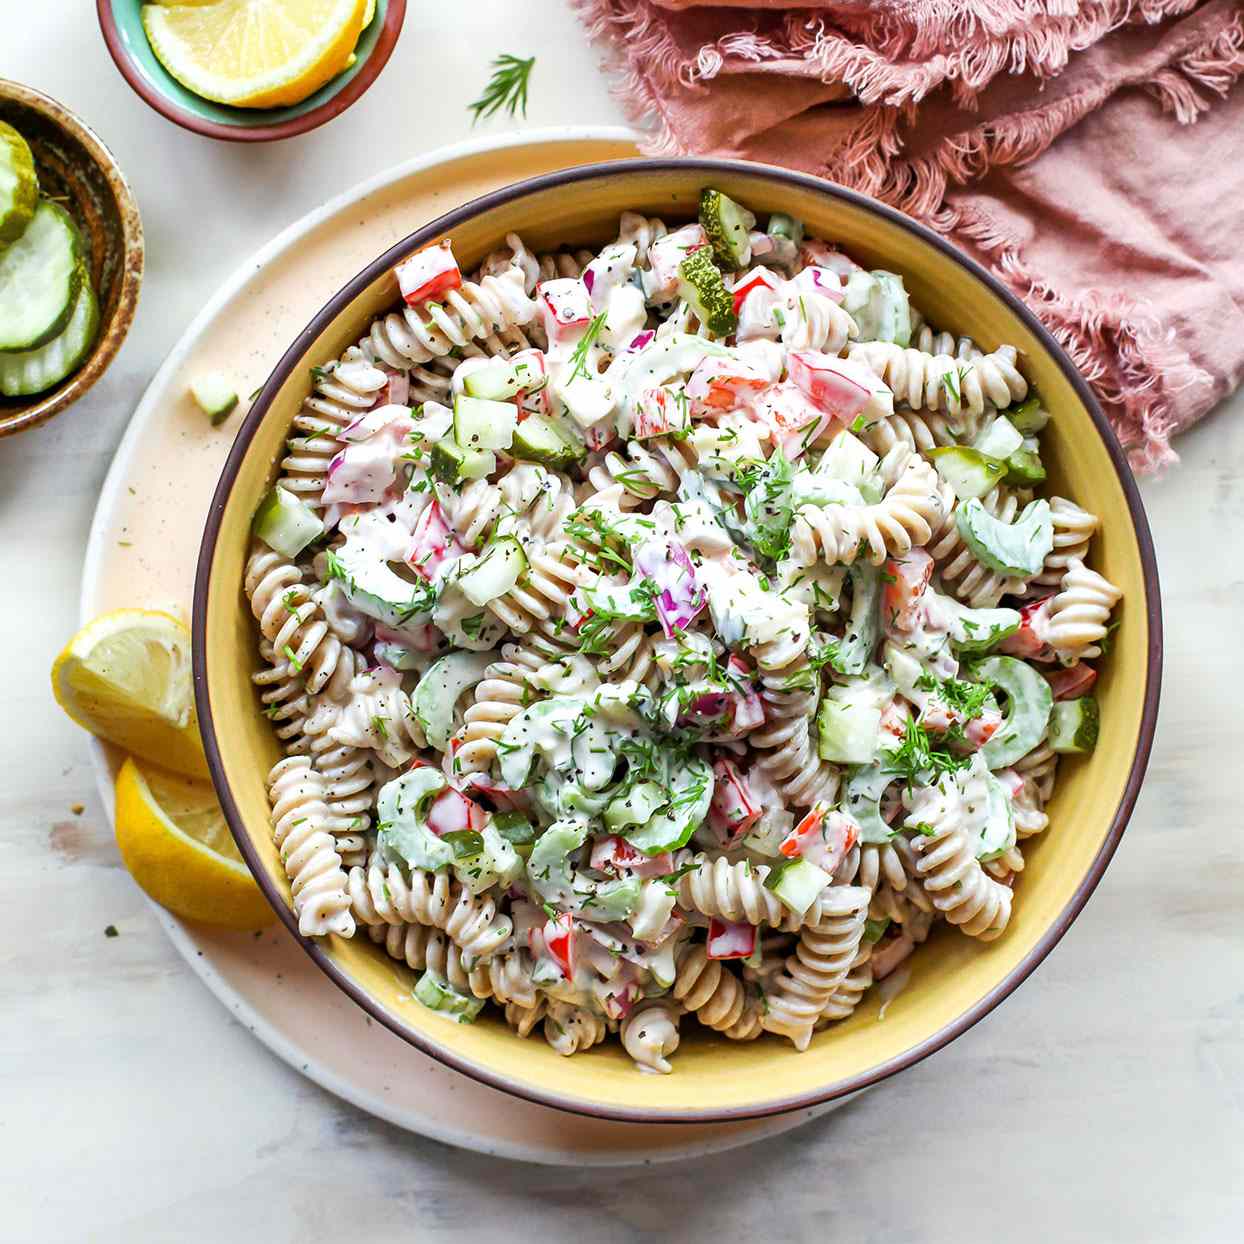 Dill-Pickle Pasta Salad with Creamy Dill Dressing